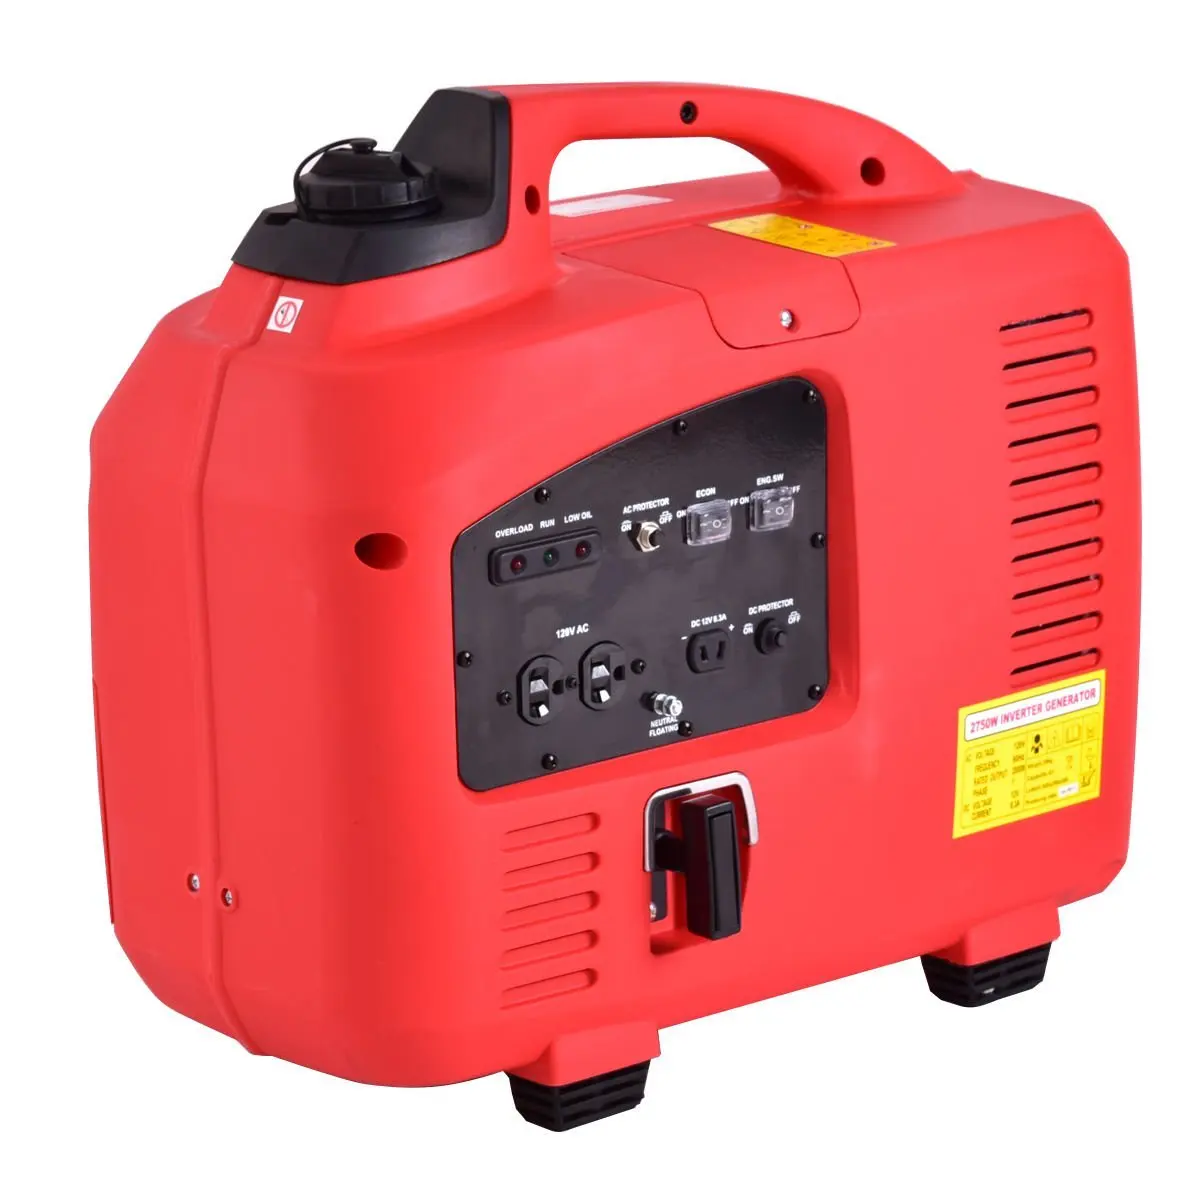 Dc12v Output 1kw 42l Small Portable Single Phase Gasoline Generator